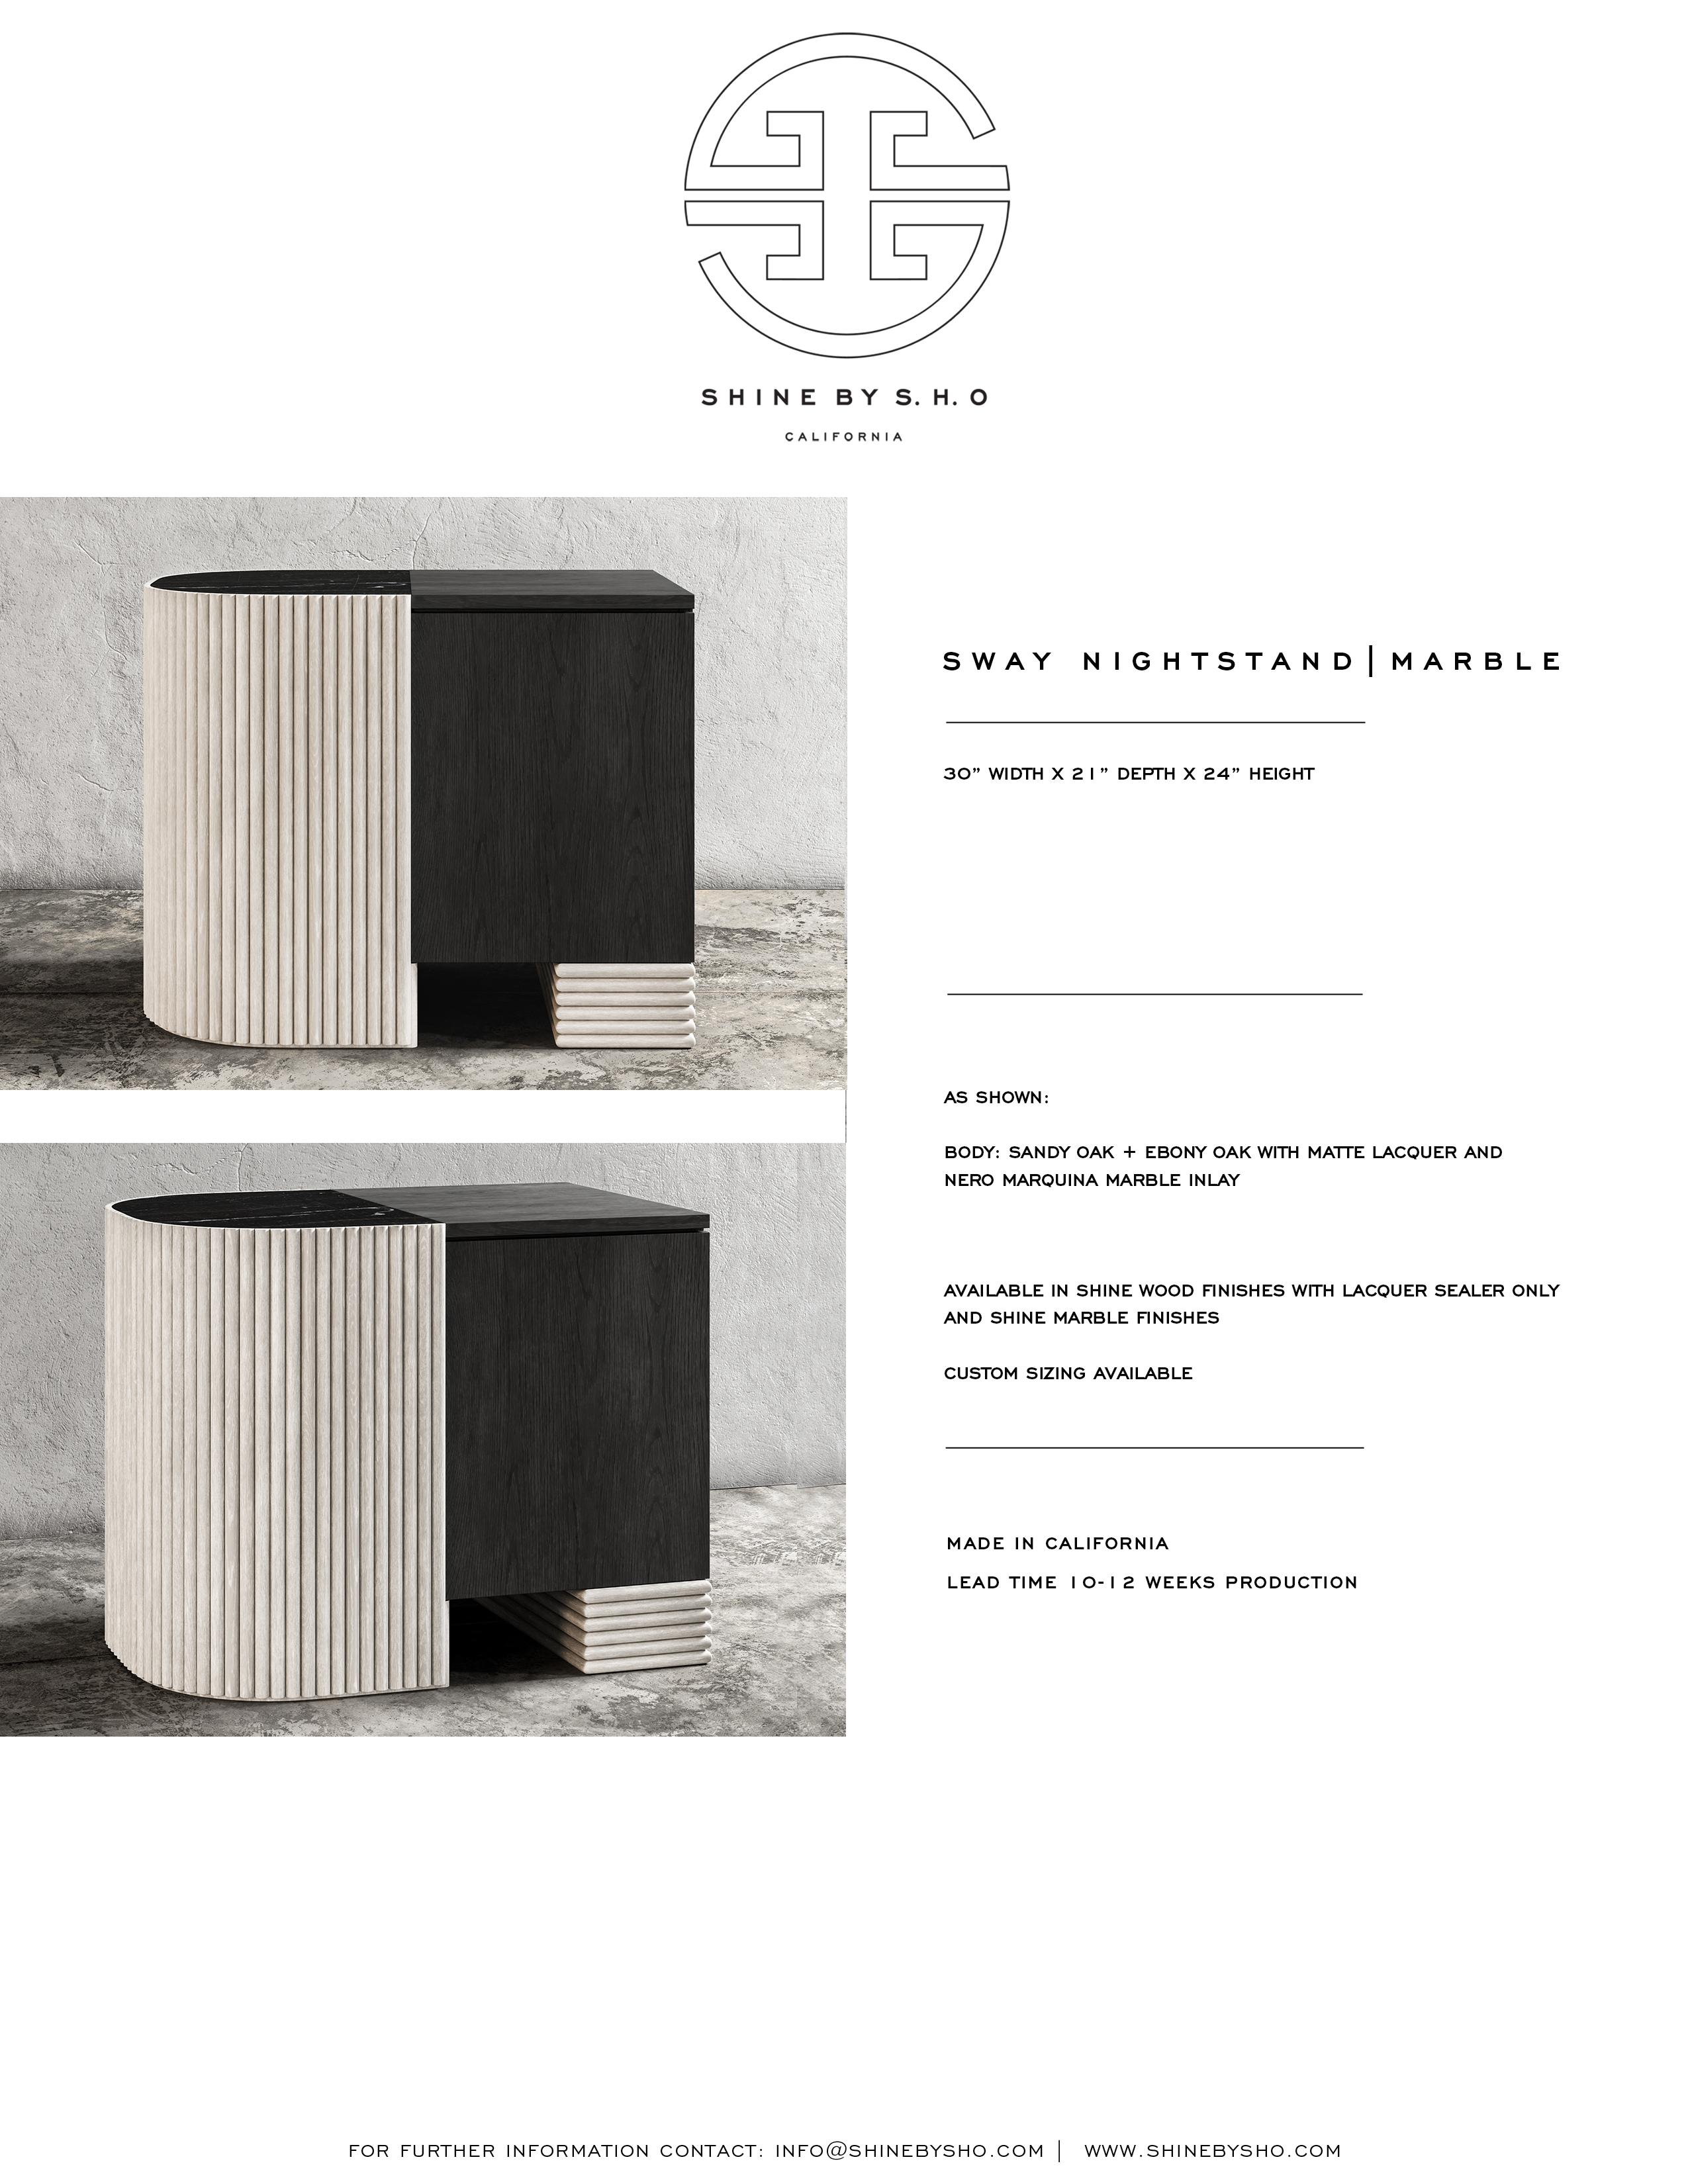 Contemporary SWAY NIGHTSTAND - Modern Design with Sandy & Ebony Oak + Nero Marquina Marble For Sale